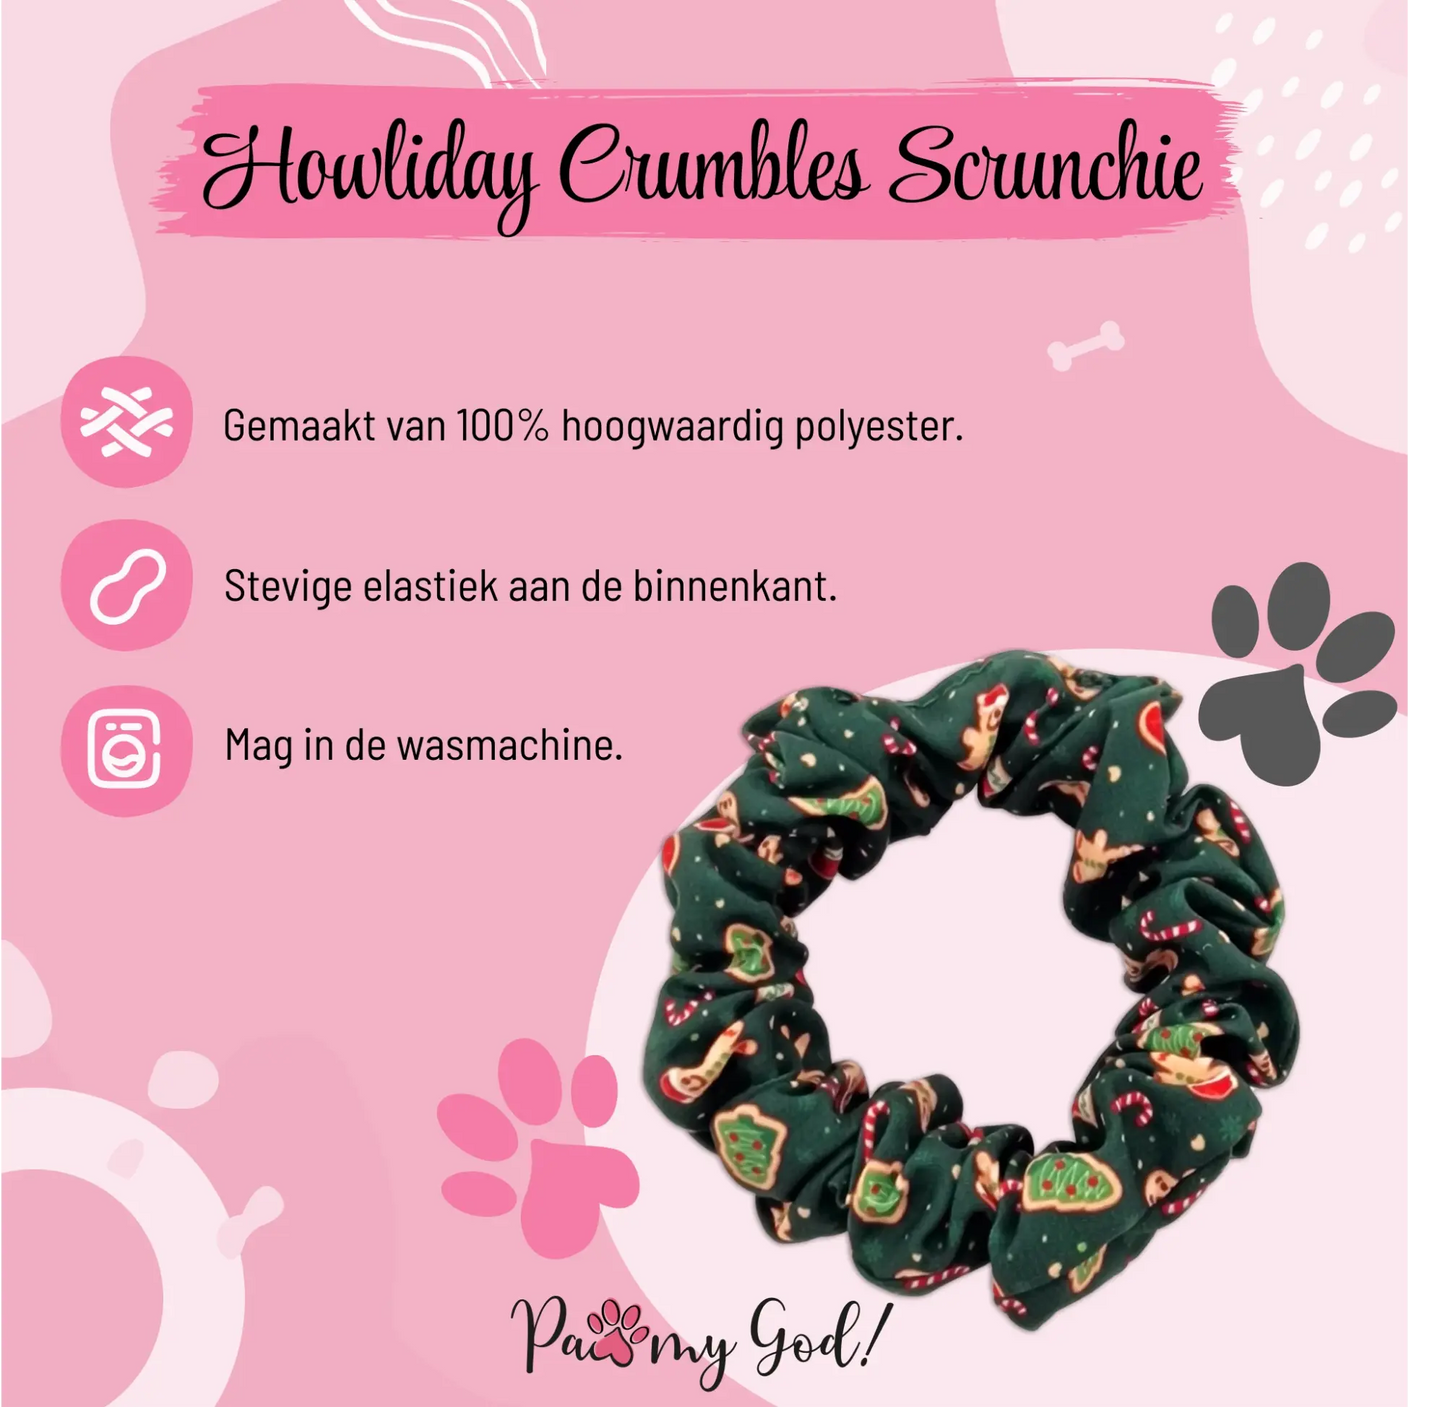 Howliday Crumbles Scrunchie Features